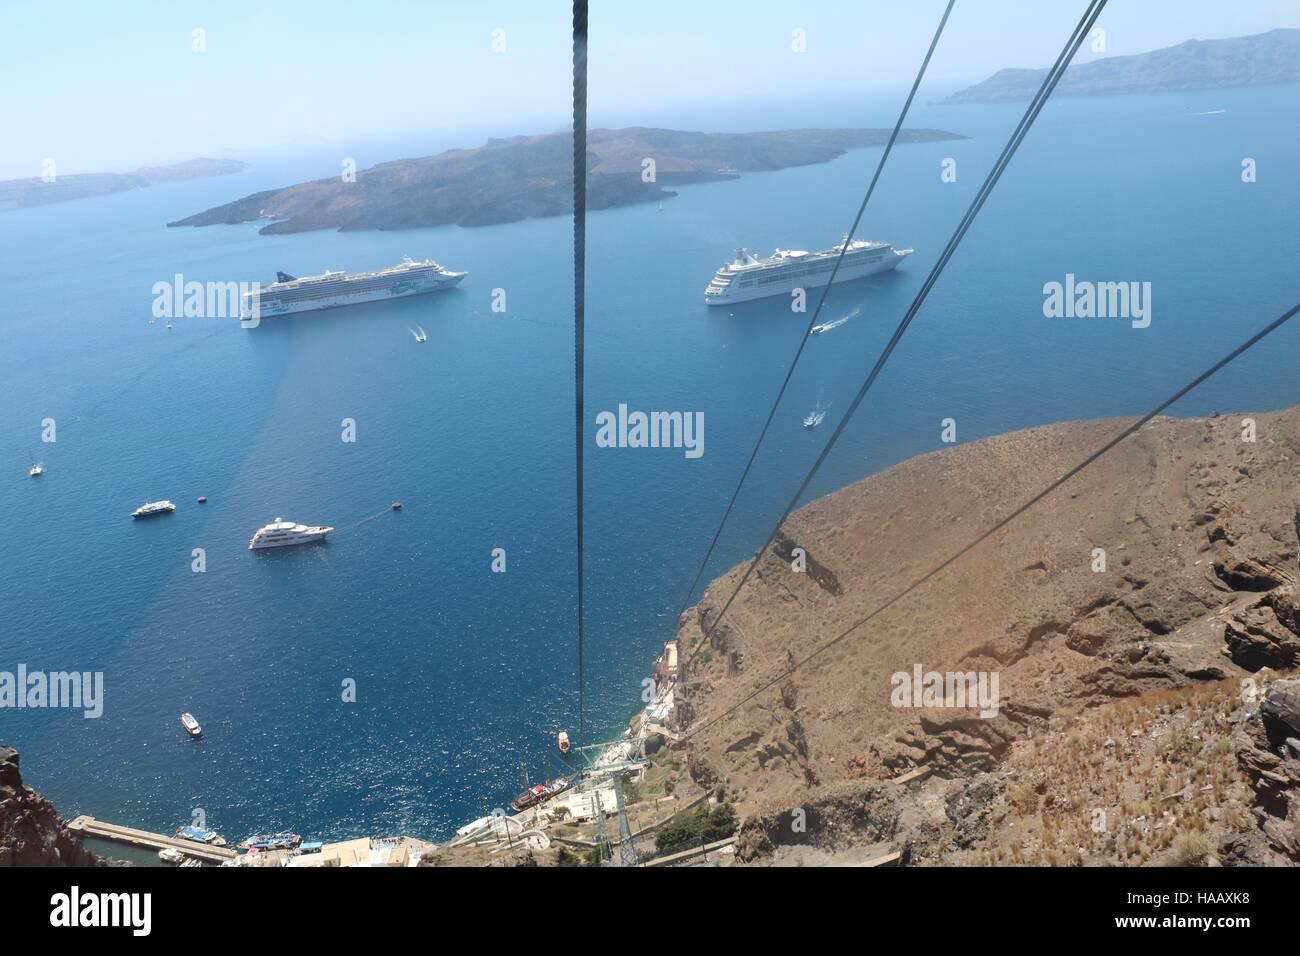 View from the top of the cable cars down into the sea, showing  the depth and drop from the top, in Santorini, Greece Stock Photo